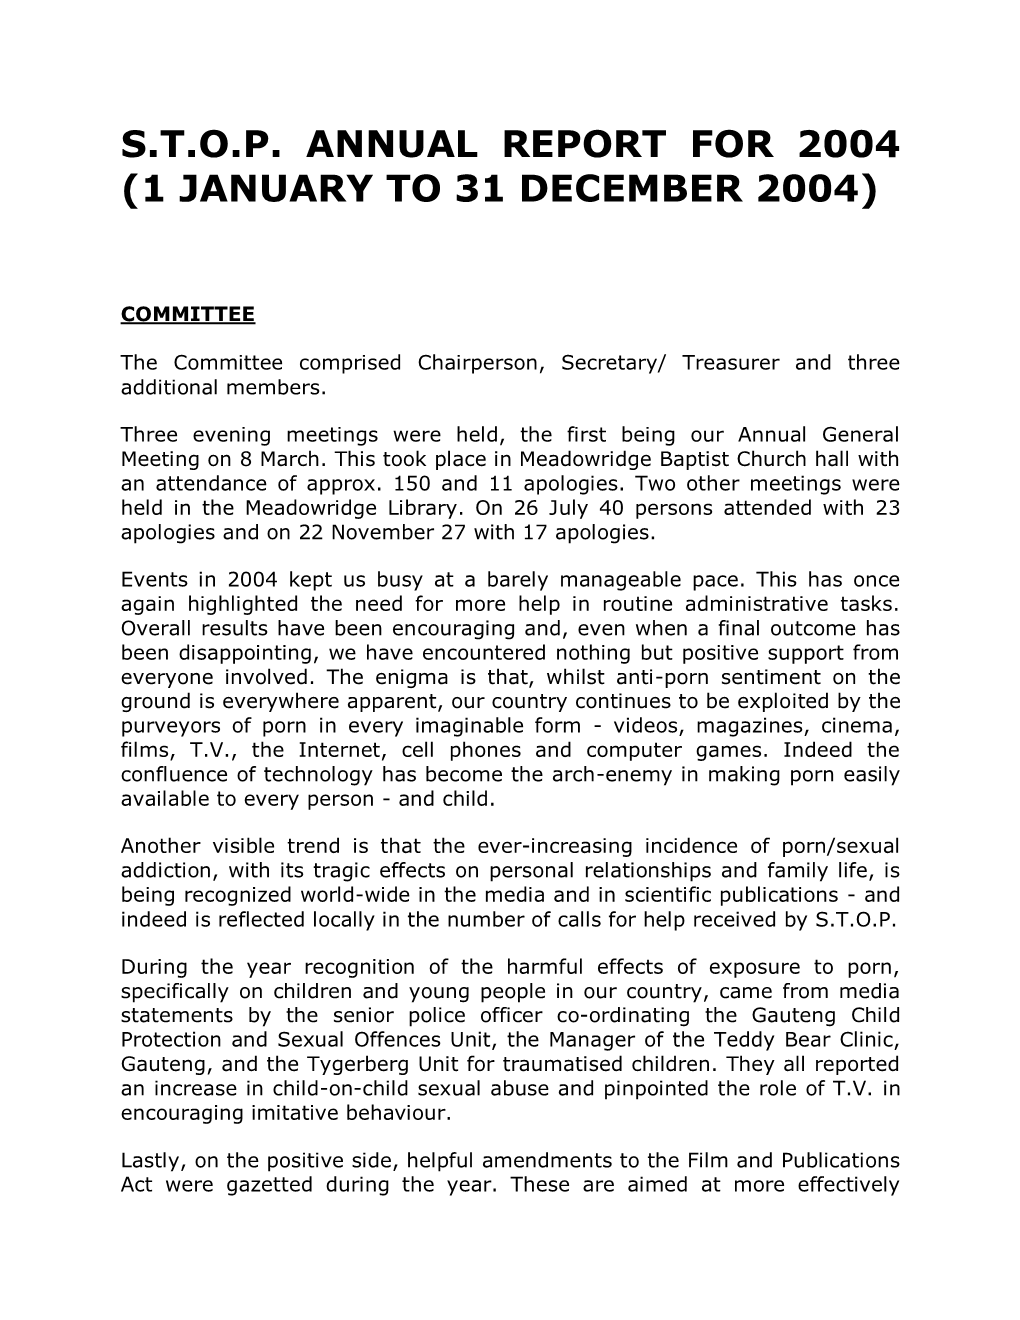 S.T.O.P. Annual Report for 2004 (1 January to 31 December 2004)